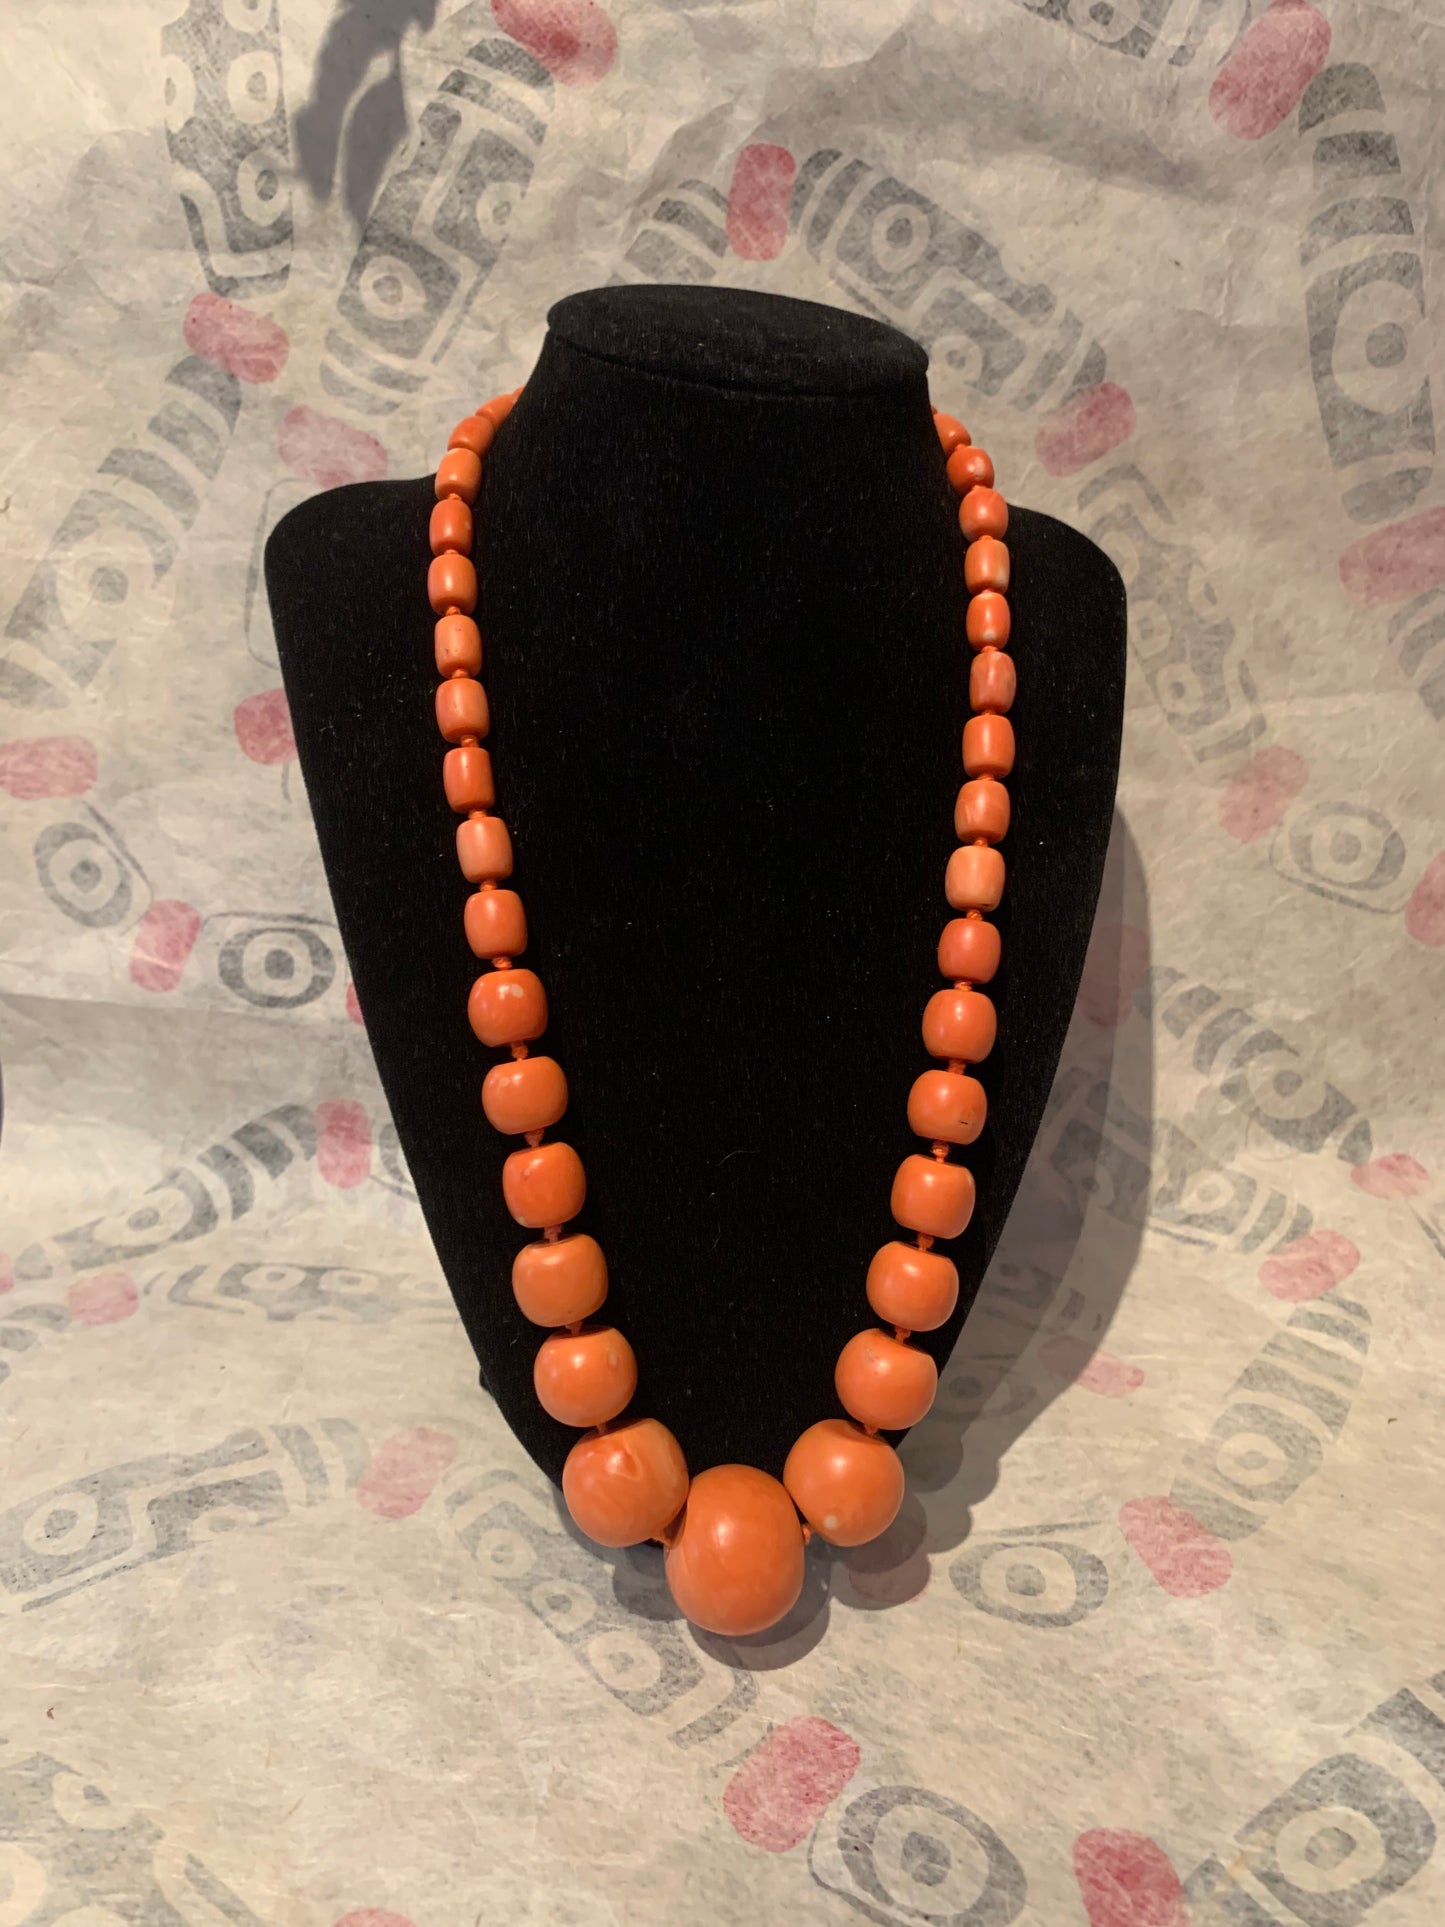 A coral bead necklace